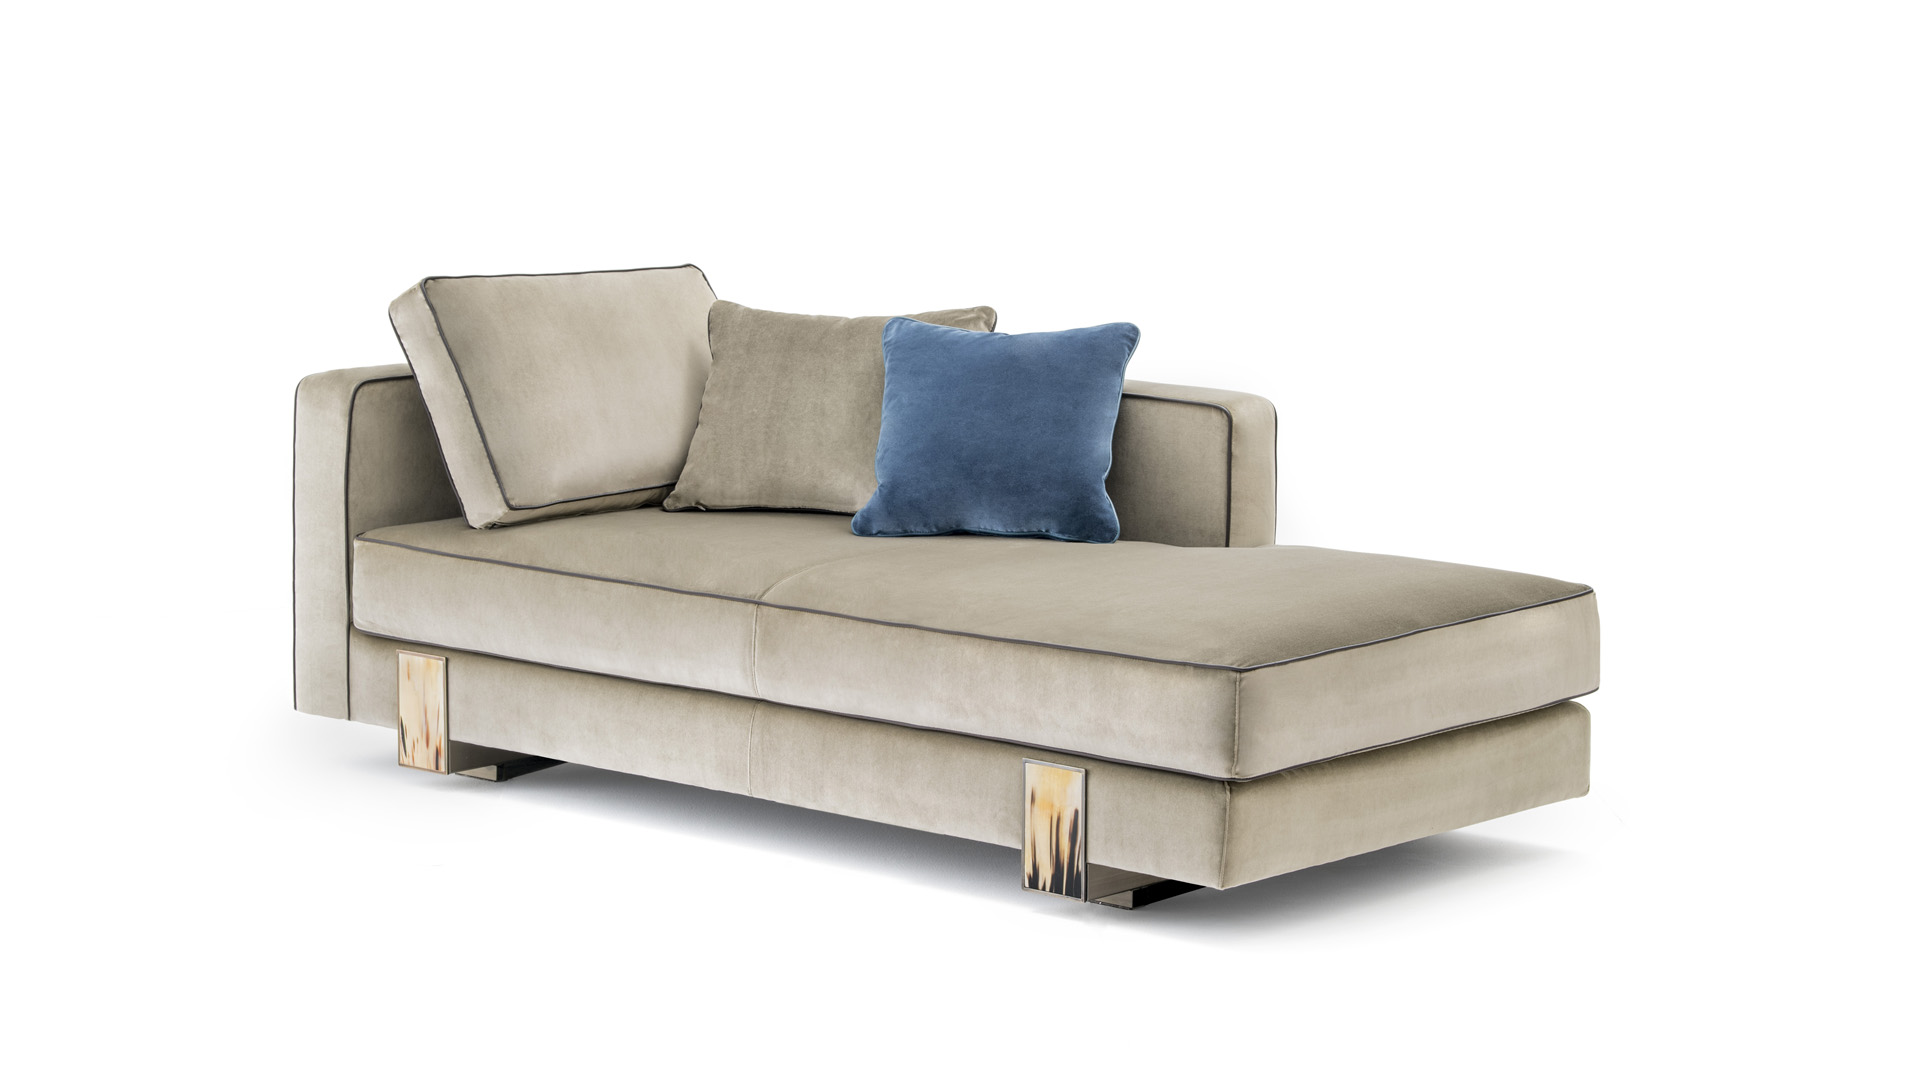 Sofas and seats - Adriano chaise longue in Lario velvet with horn details - cover - Arcahorn